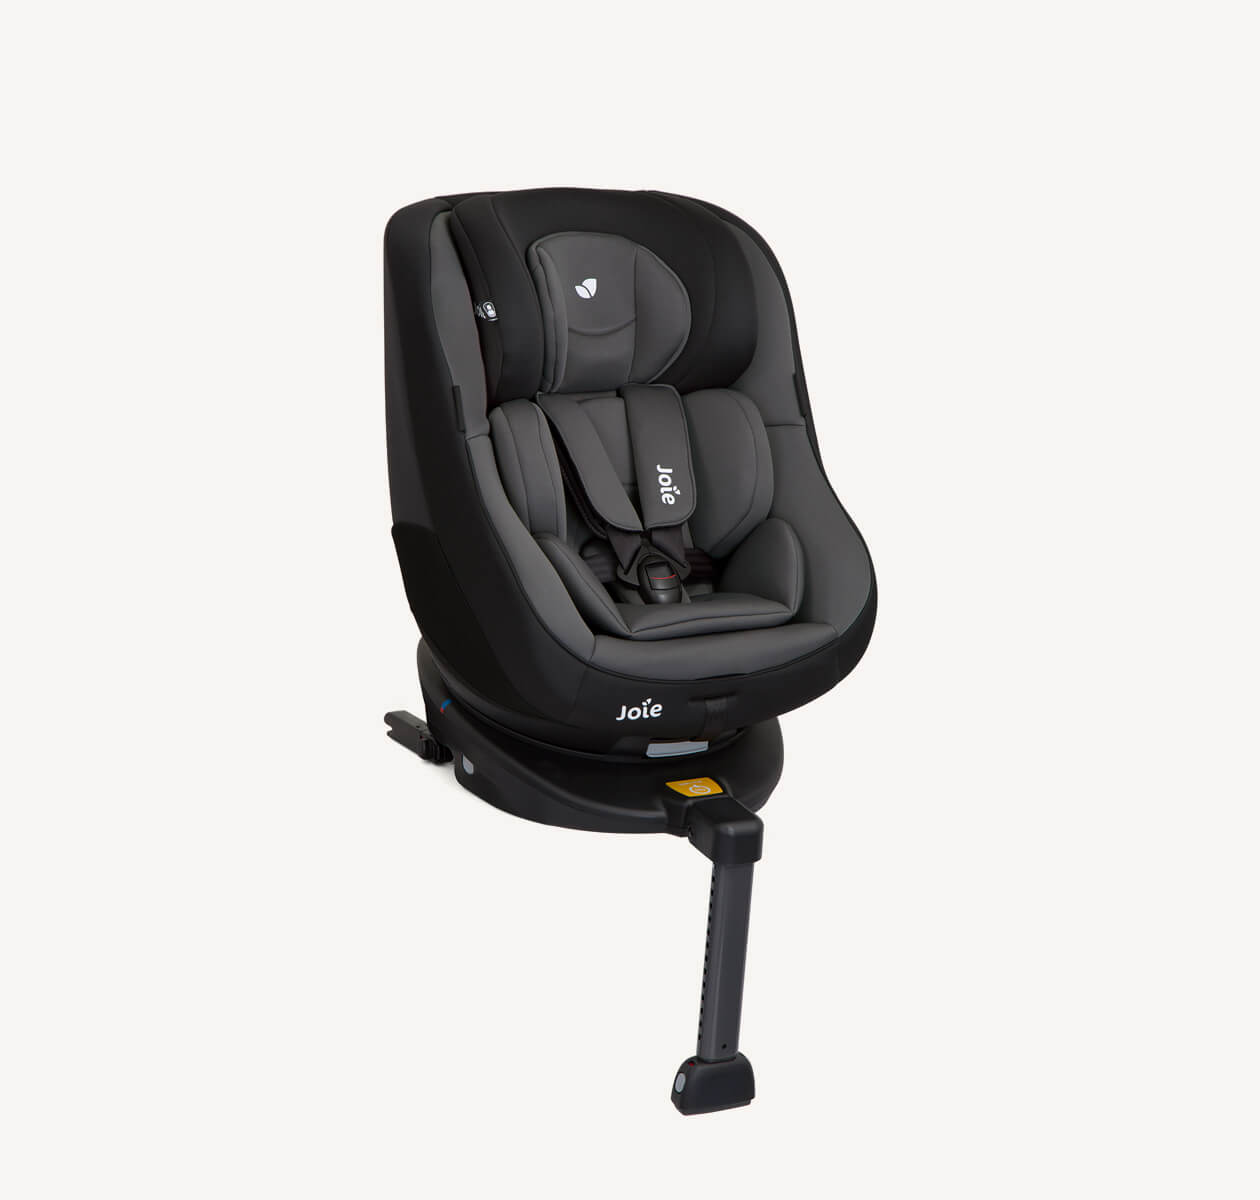 Joie spin 360 spinning car seat| spinning, 360